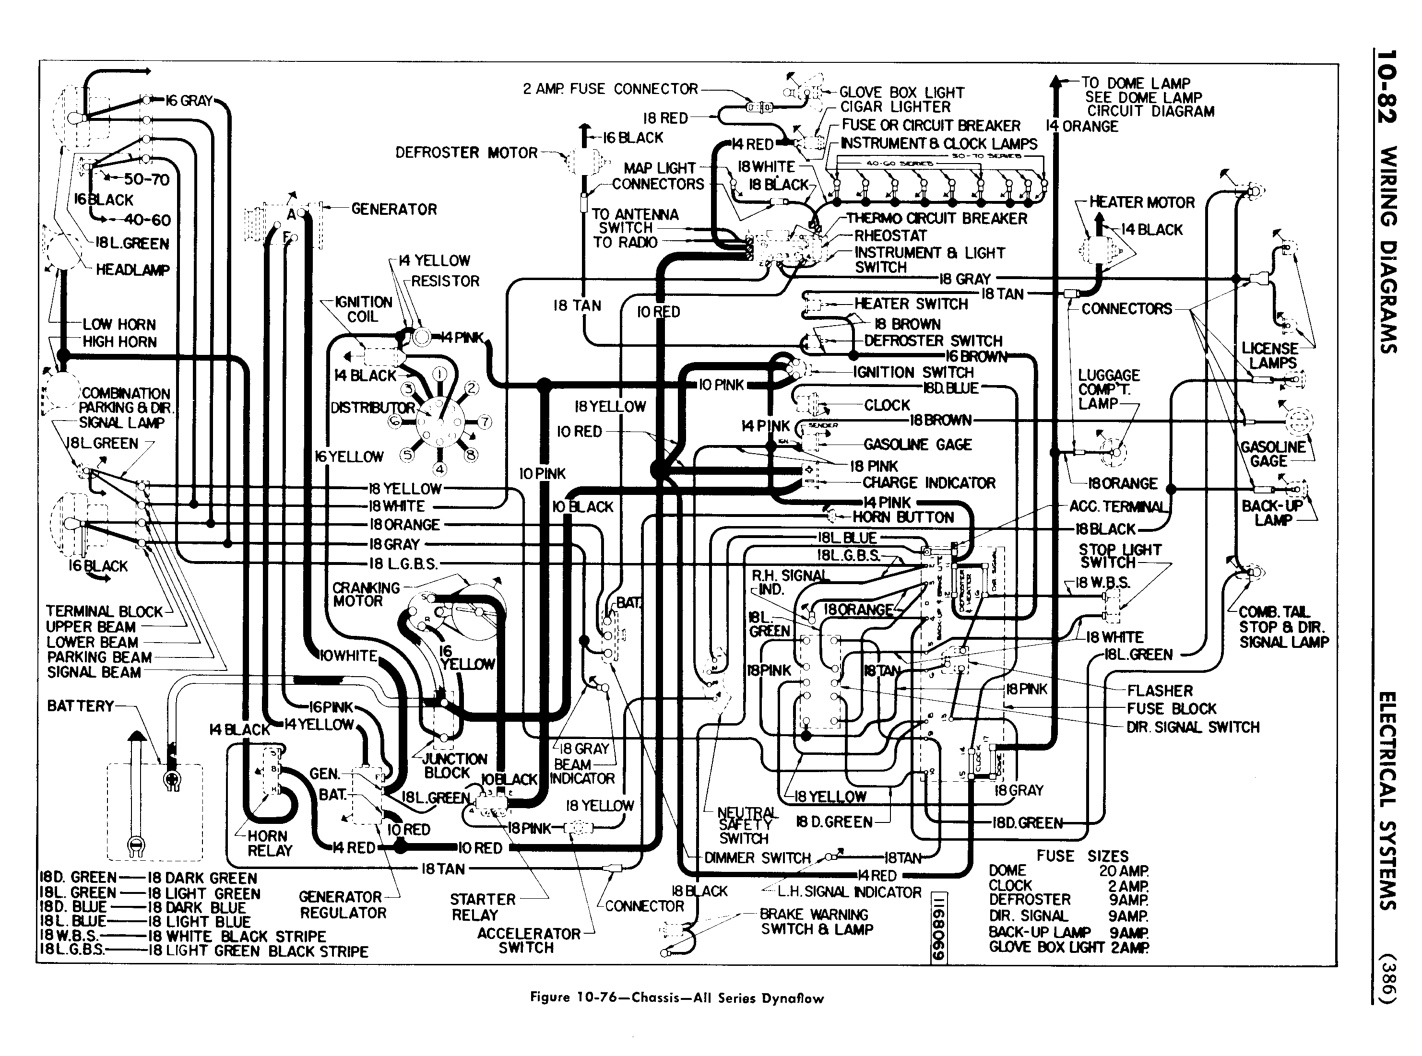 n_11 1955 Buick Shop Manual - Electrical Systems-082-082.jpg